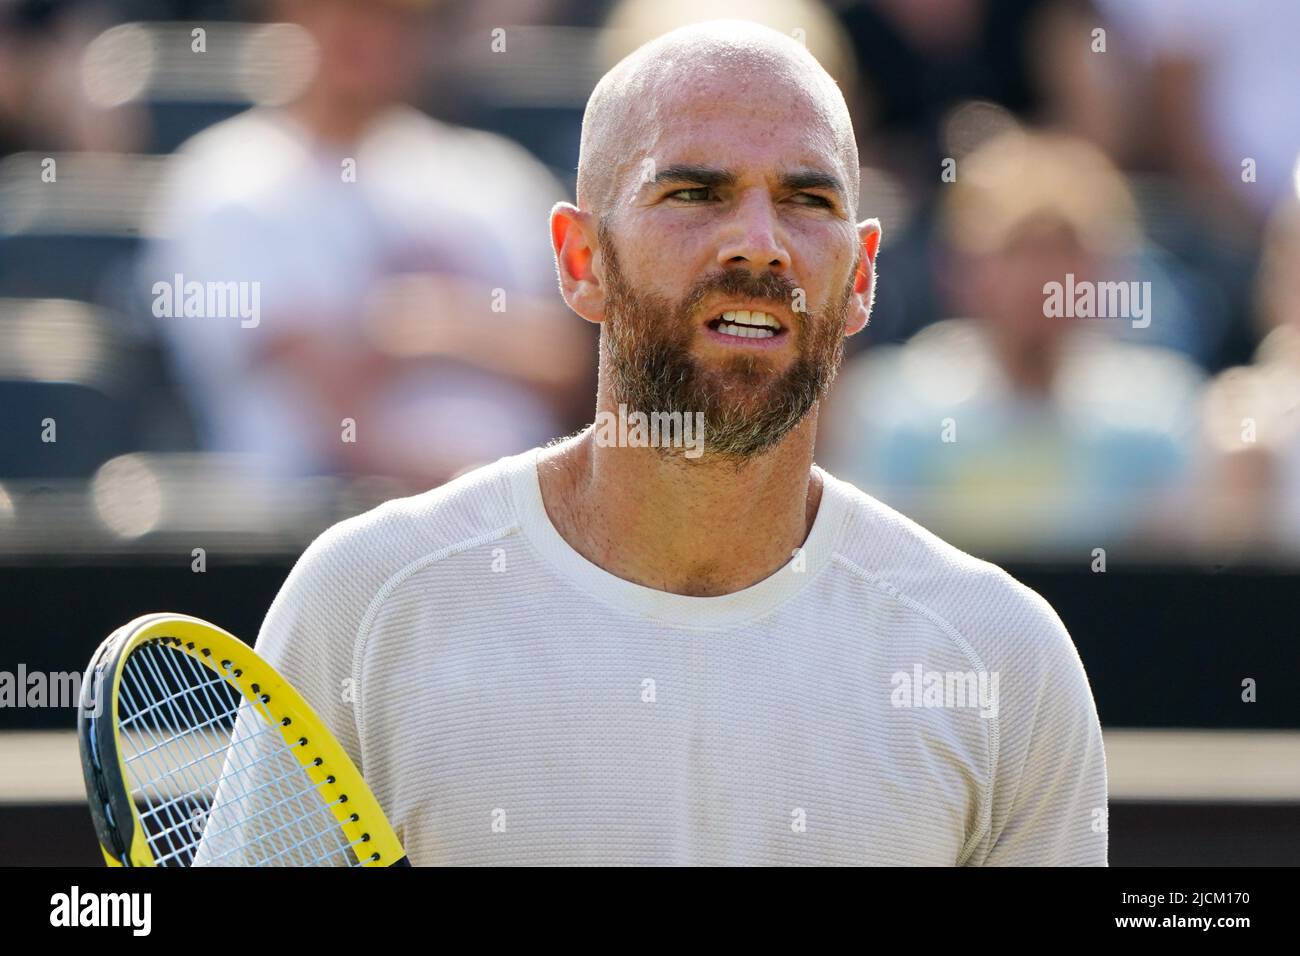 'S-HERTOGENBOSCH, NETHERLANDS - JUNE 11: Adrian Mannarino of France during the Mens Singles Semi Finals match between Daniil Medvedev of Russia and Adrian Mannarino of France at the Autotron on June 11, 2022 in 's-Hertogenbosch, Netherlands (Photo by Joris Verwijst/BSR Agency) Stock Photo